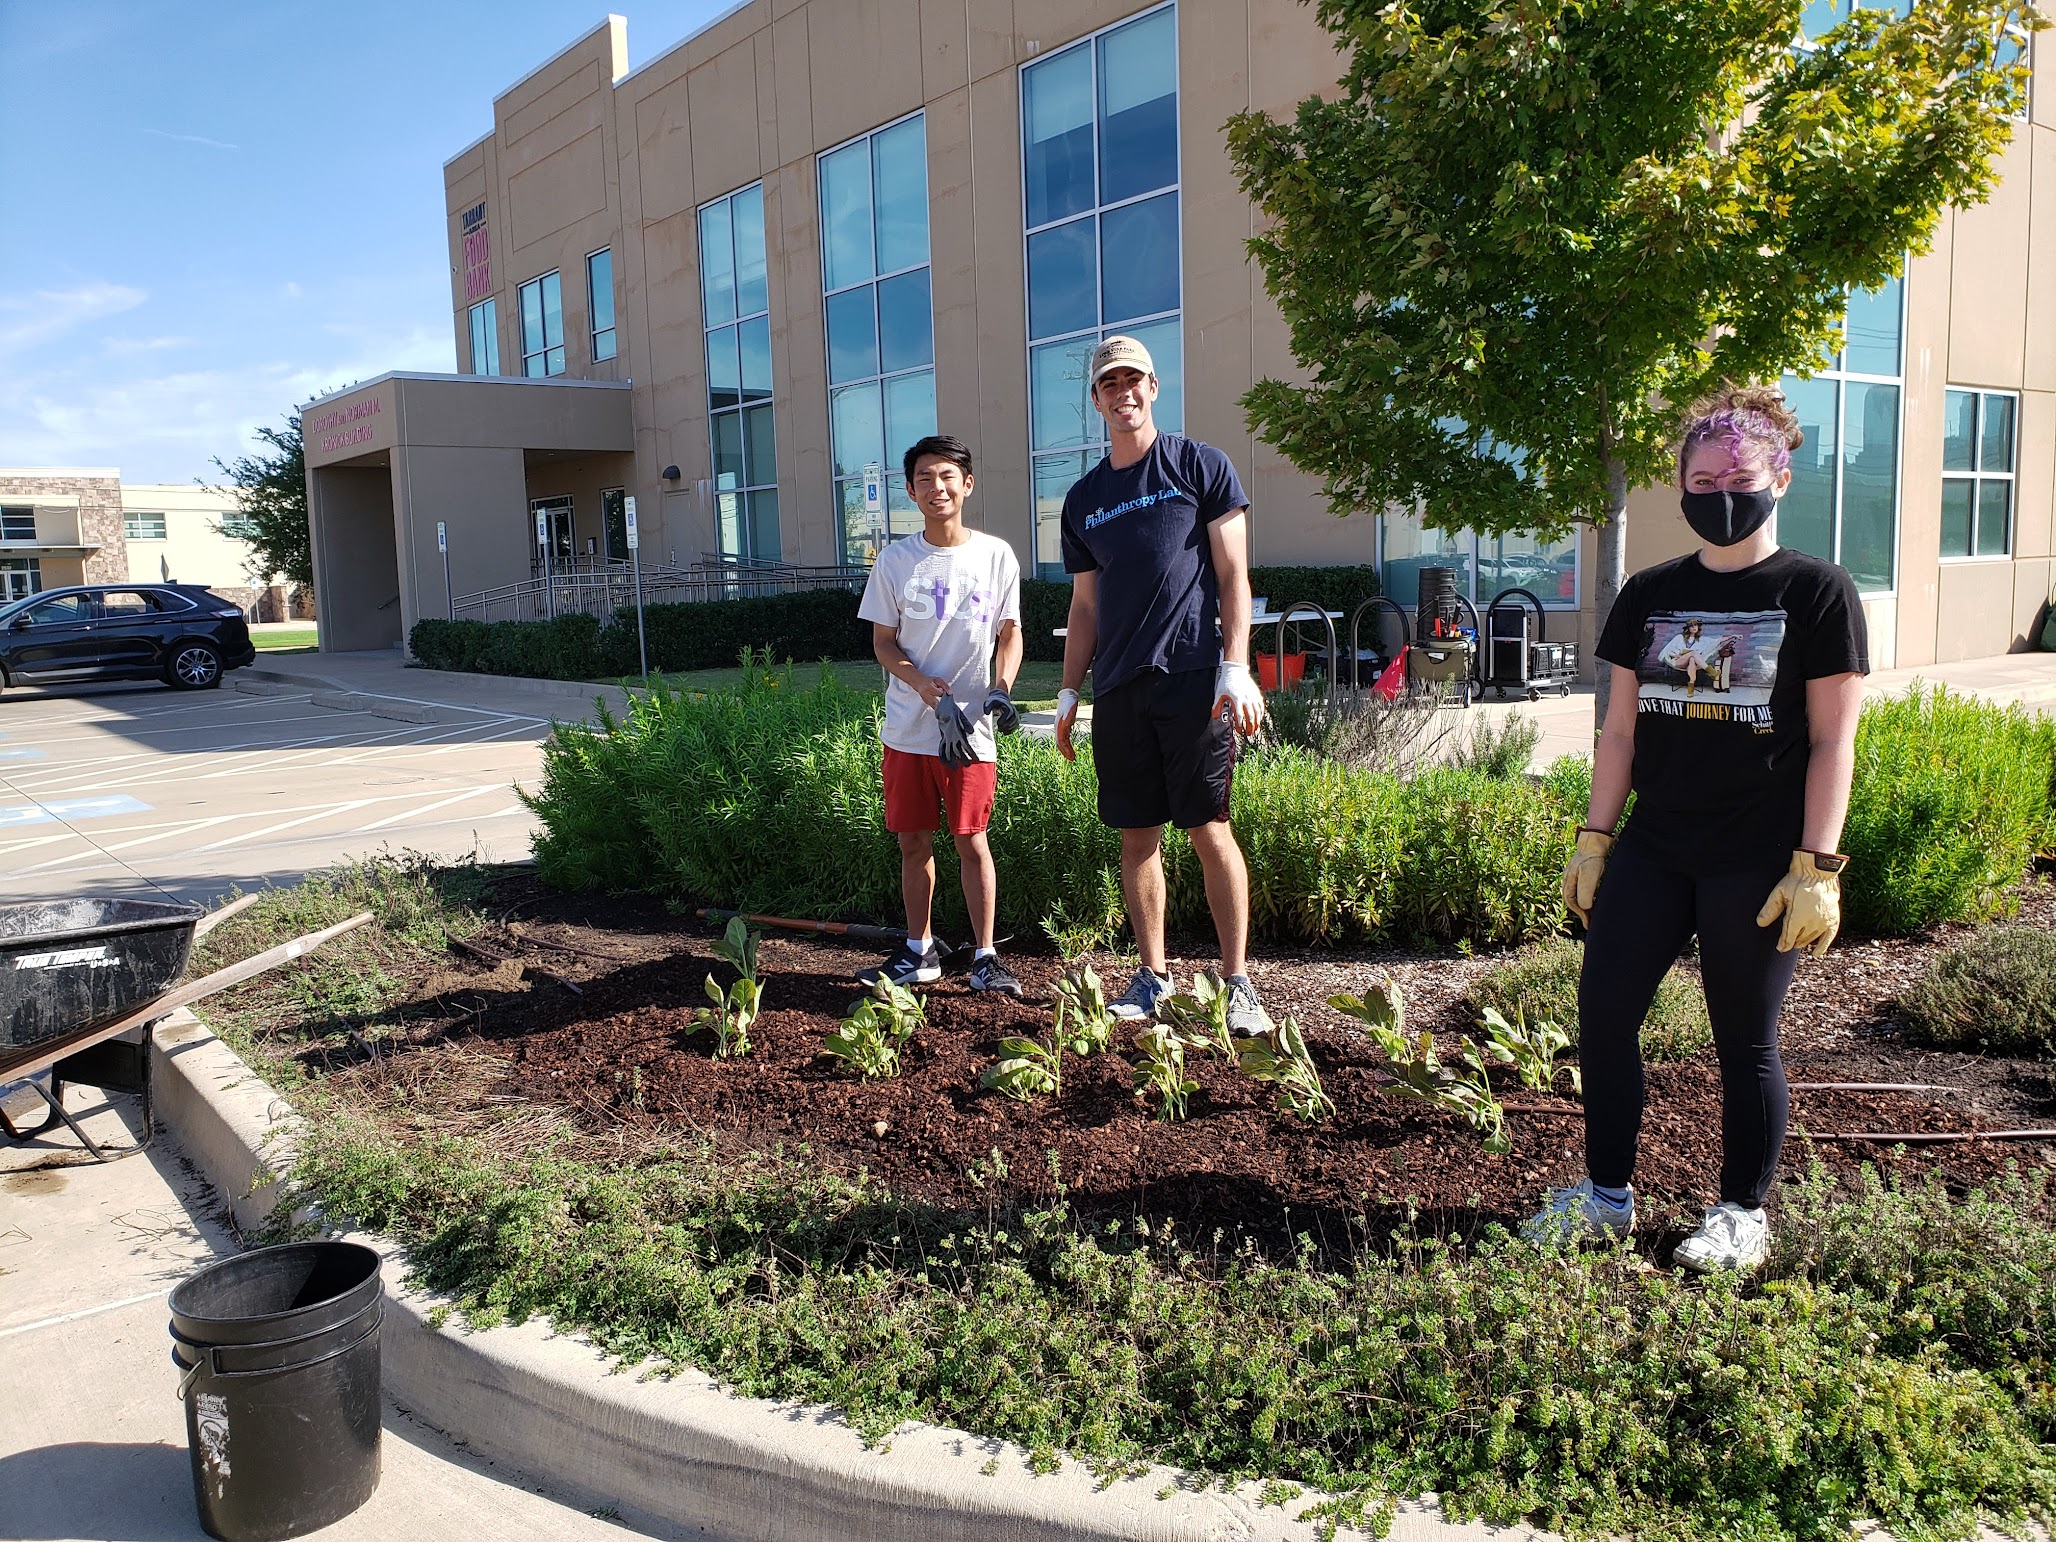 Drew Brooks (left) volunteering in the gardens of the Tarrant County Food Bank, another hands-on experience of the course.